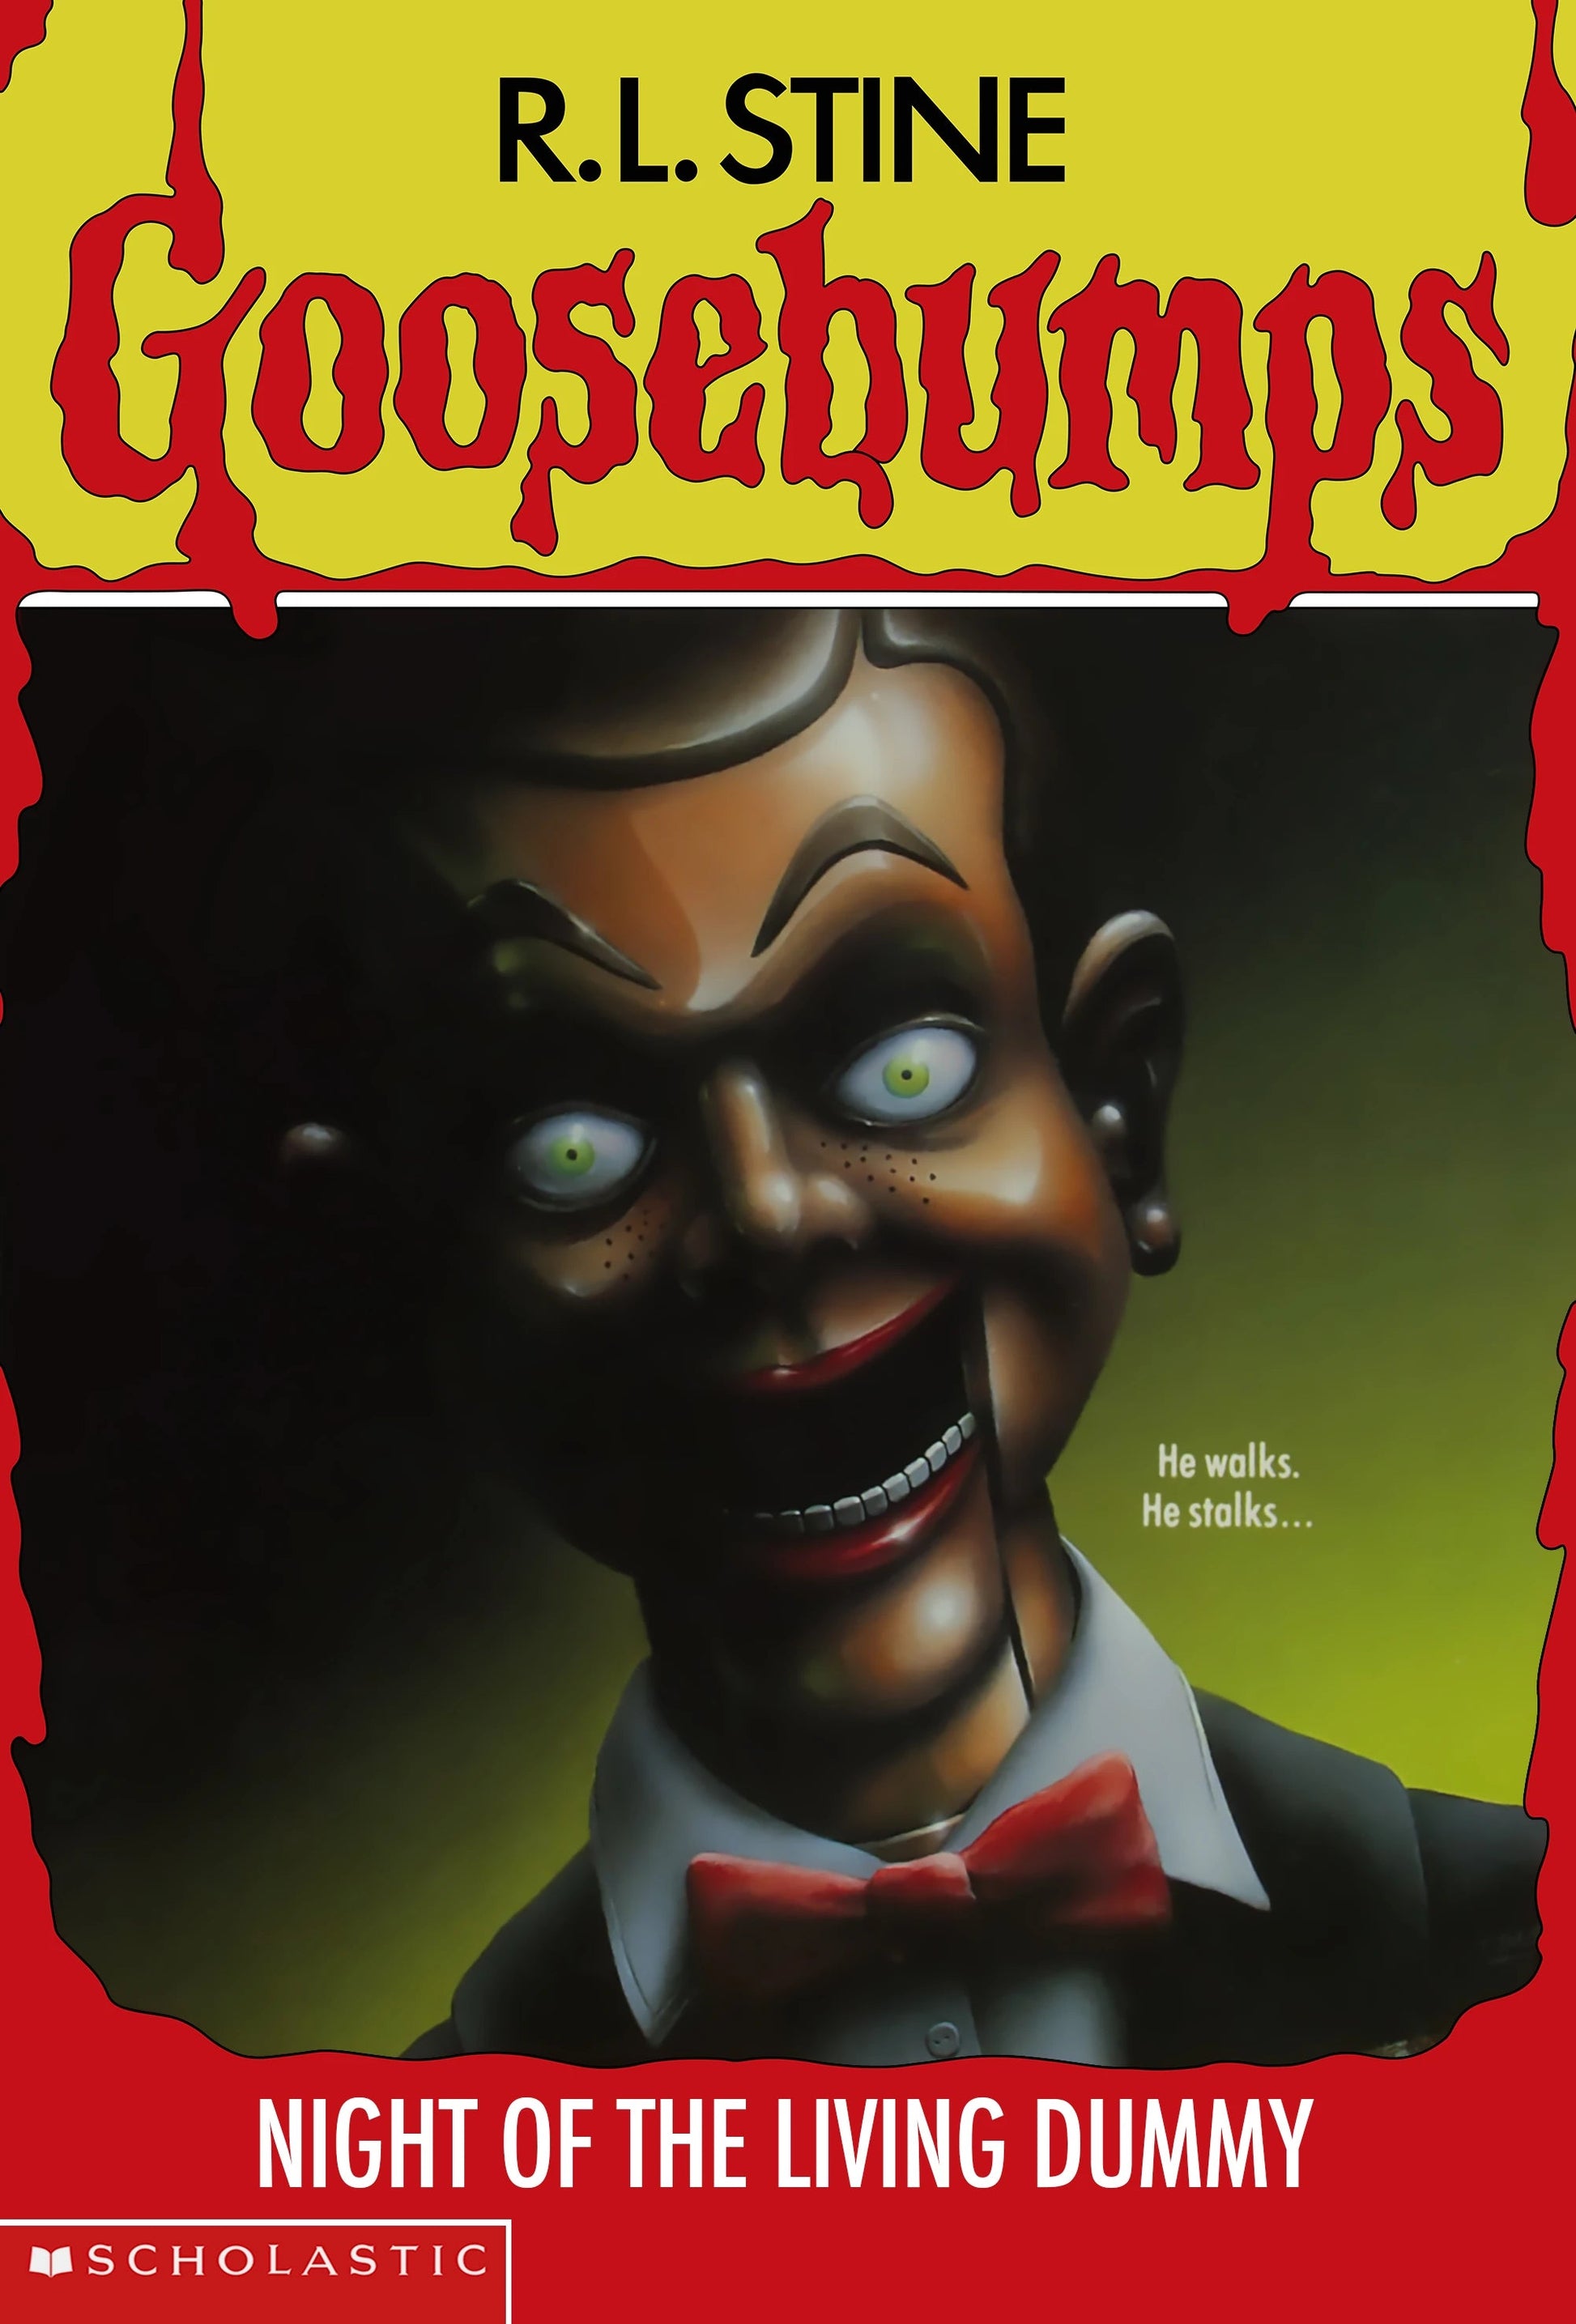 Night of the Living Dummy (Goosebumps #7) by R. L. Stine - Early Printing - Asylum Books